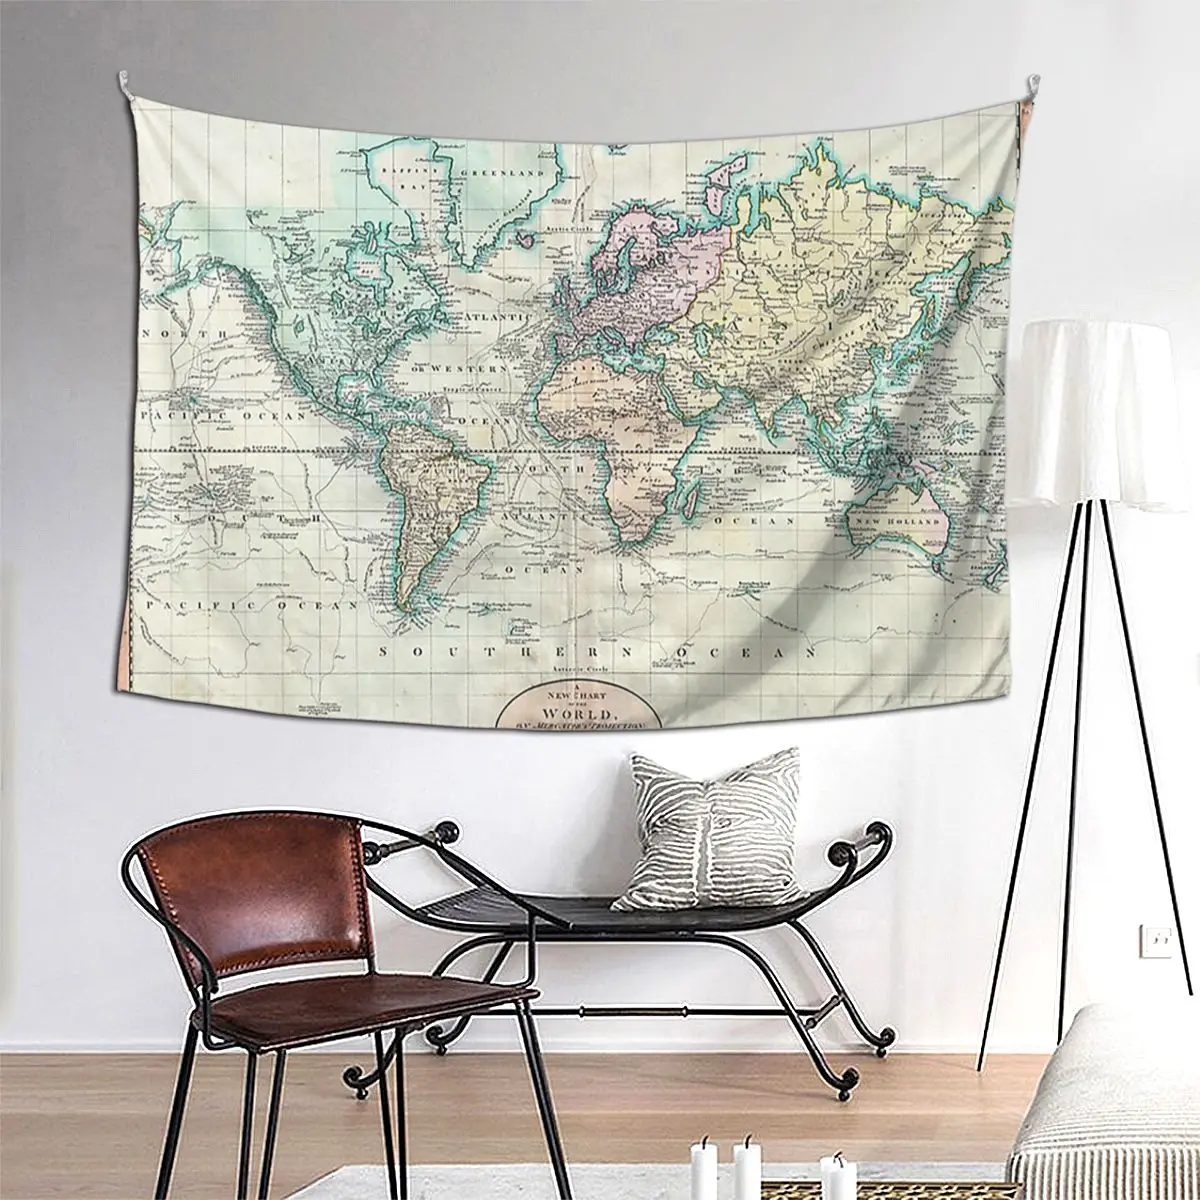 

Vintage Map Of The World (1801) Tapestry Funny Wall Hanging Aesthetic Home Decor Tapestries for Living Room Bedroom Dorm Room